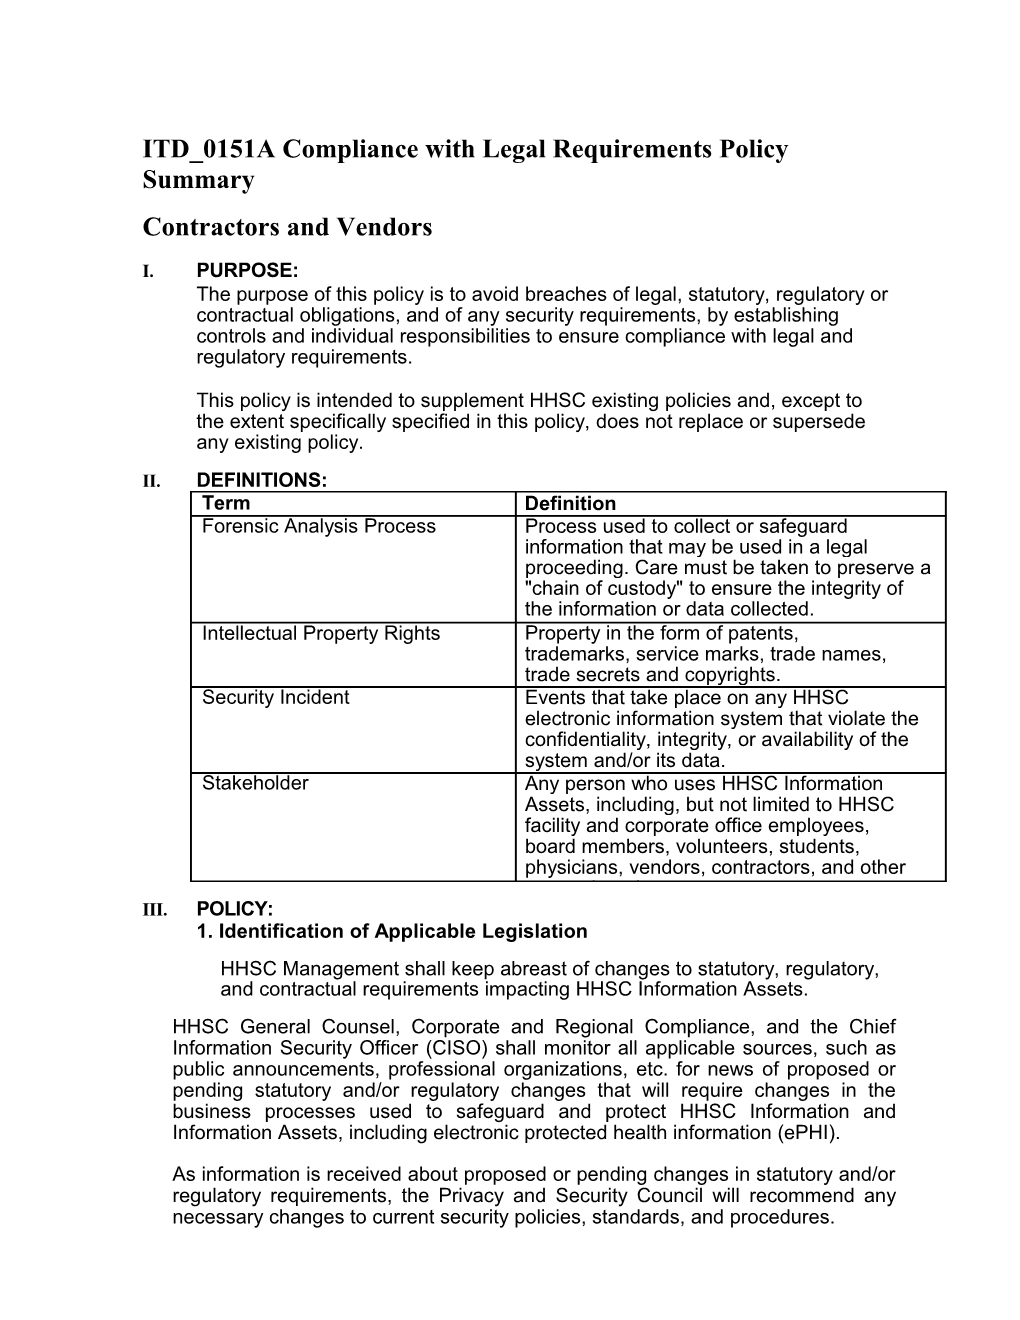 ITD 0151A Compliance with Legal Requirements Policy Summary s1